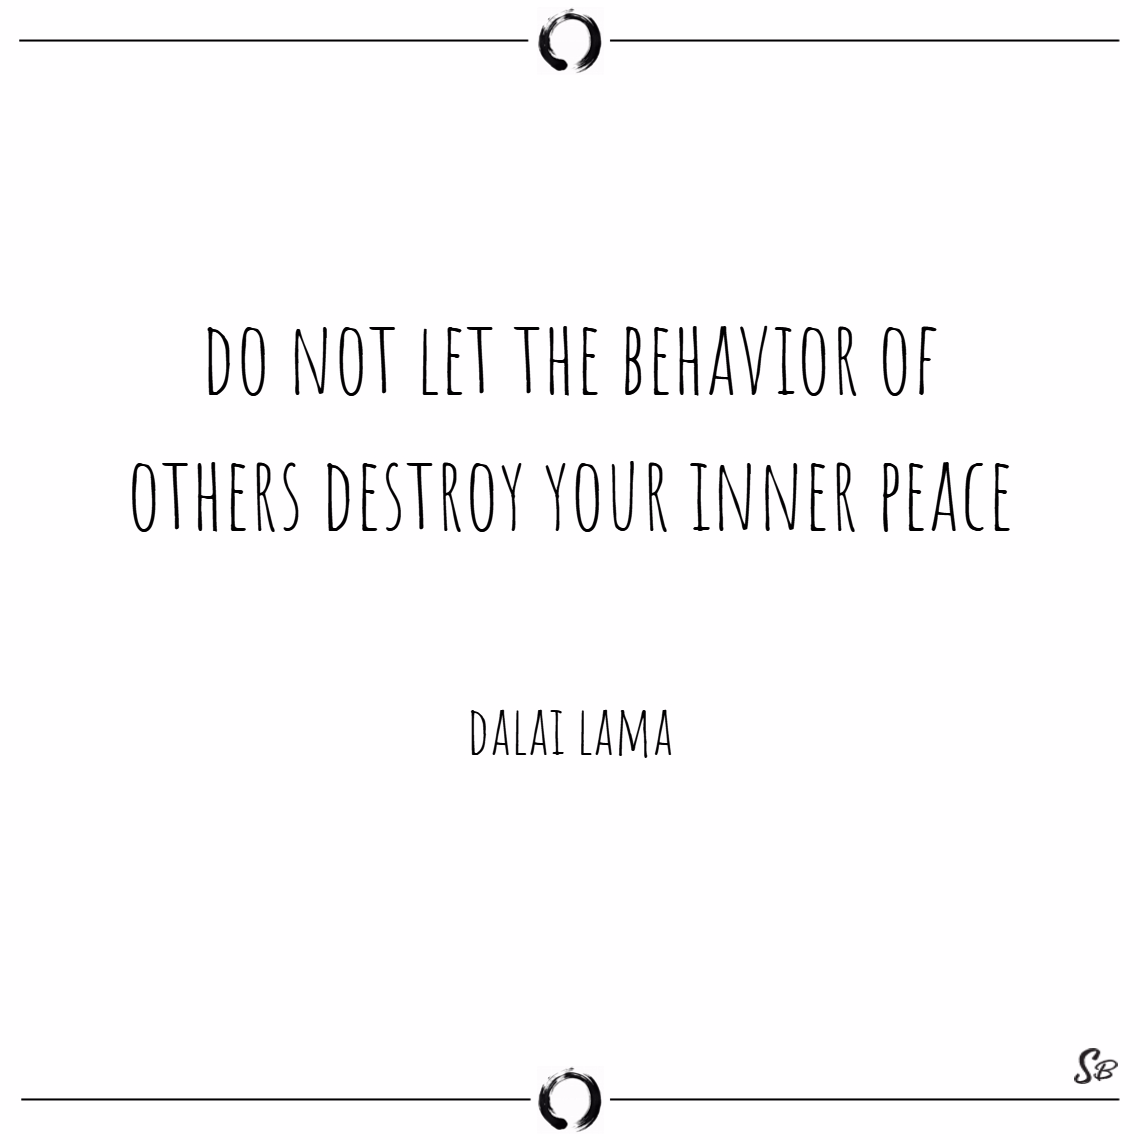 do not let the behavior of others destroy your inner peace. dalai lama